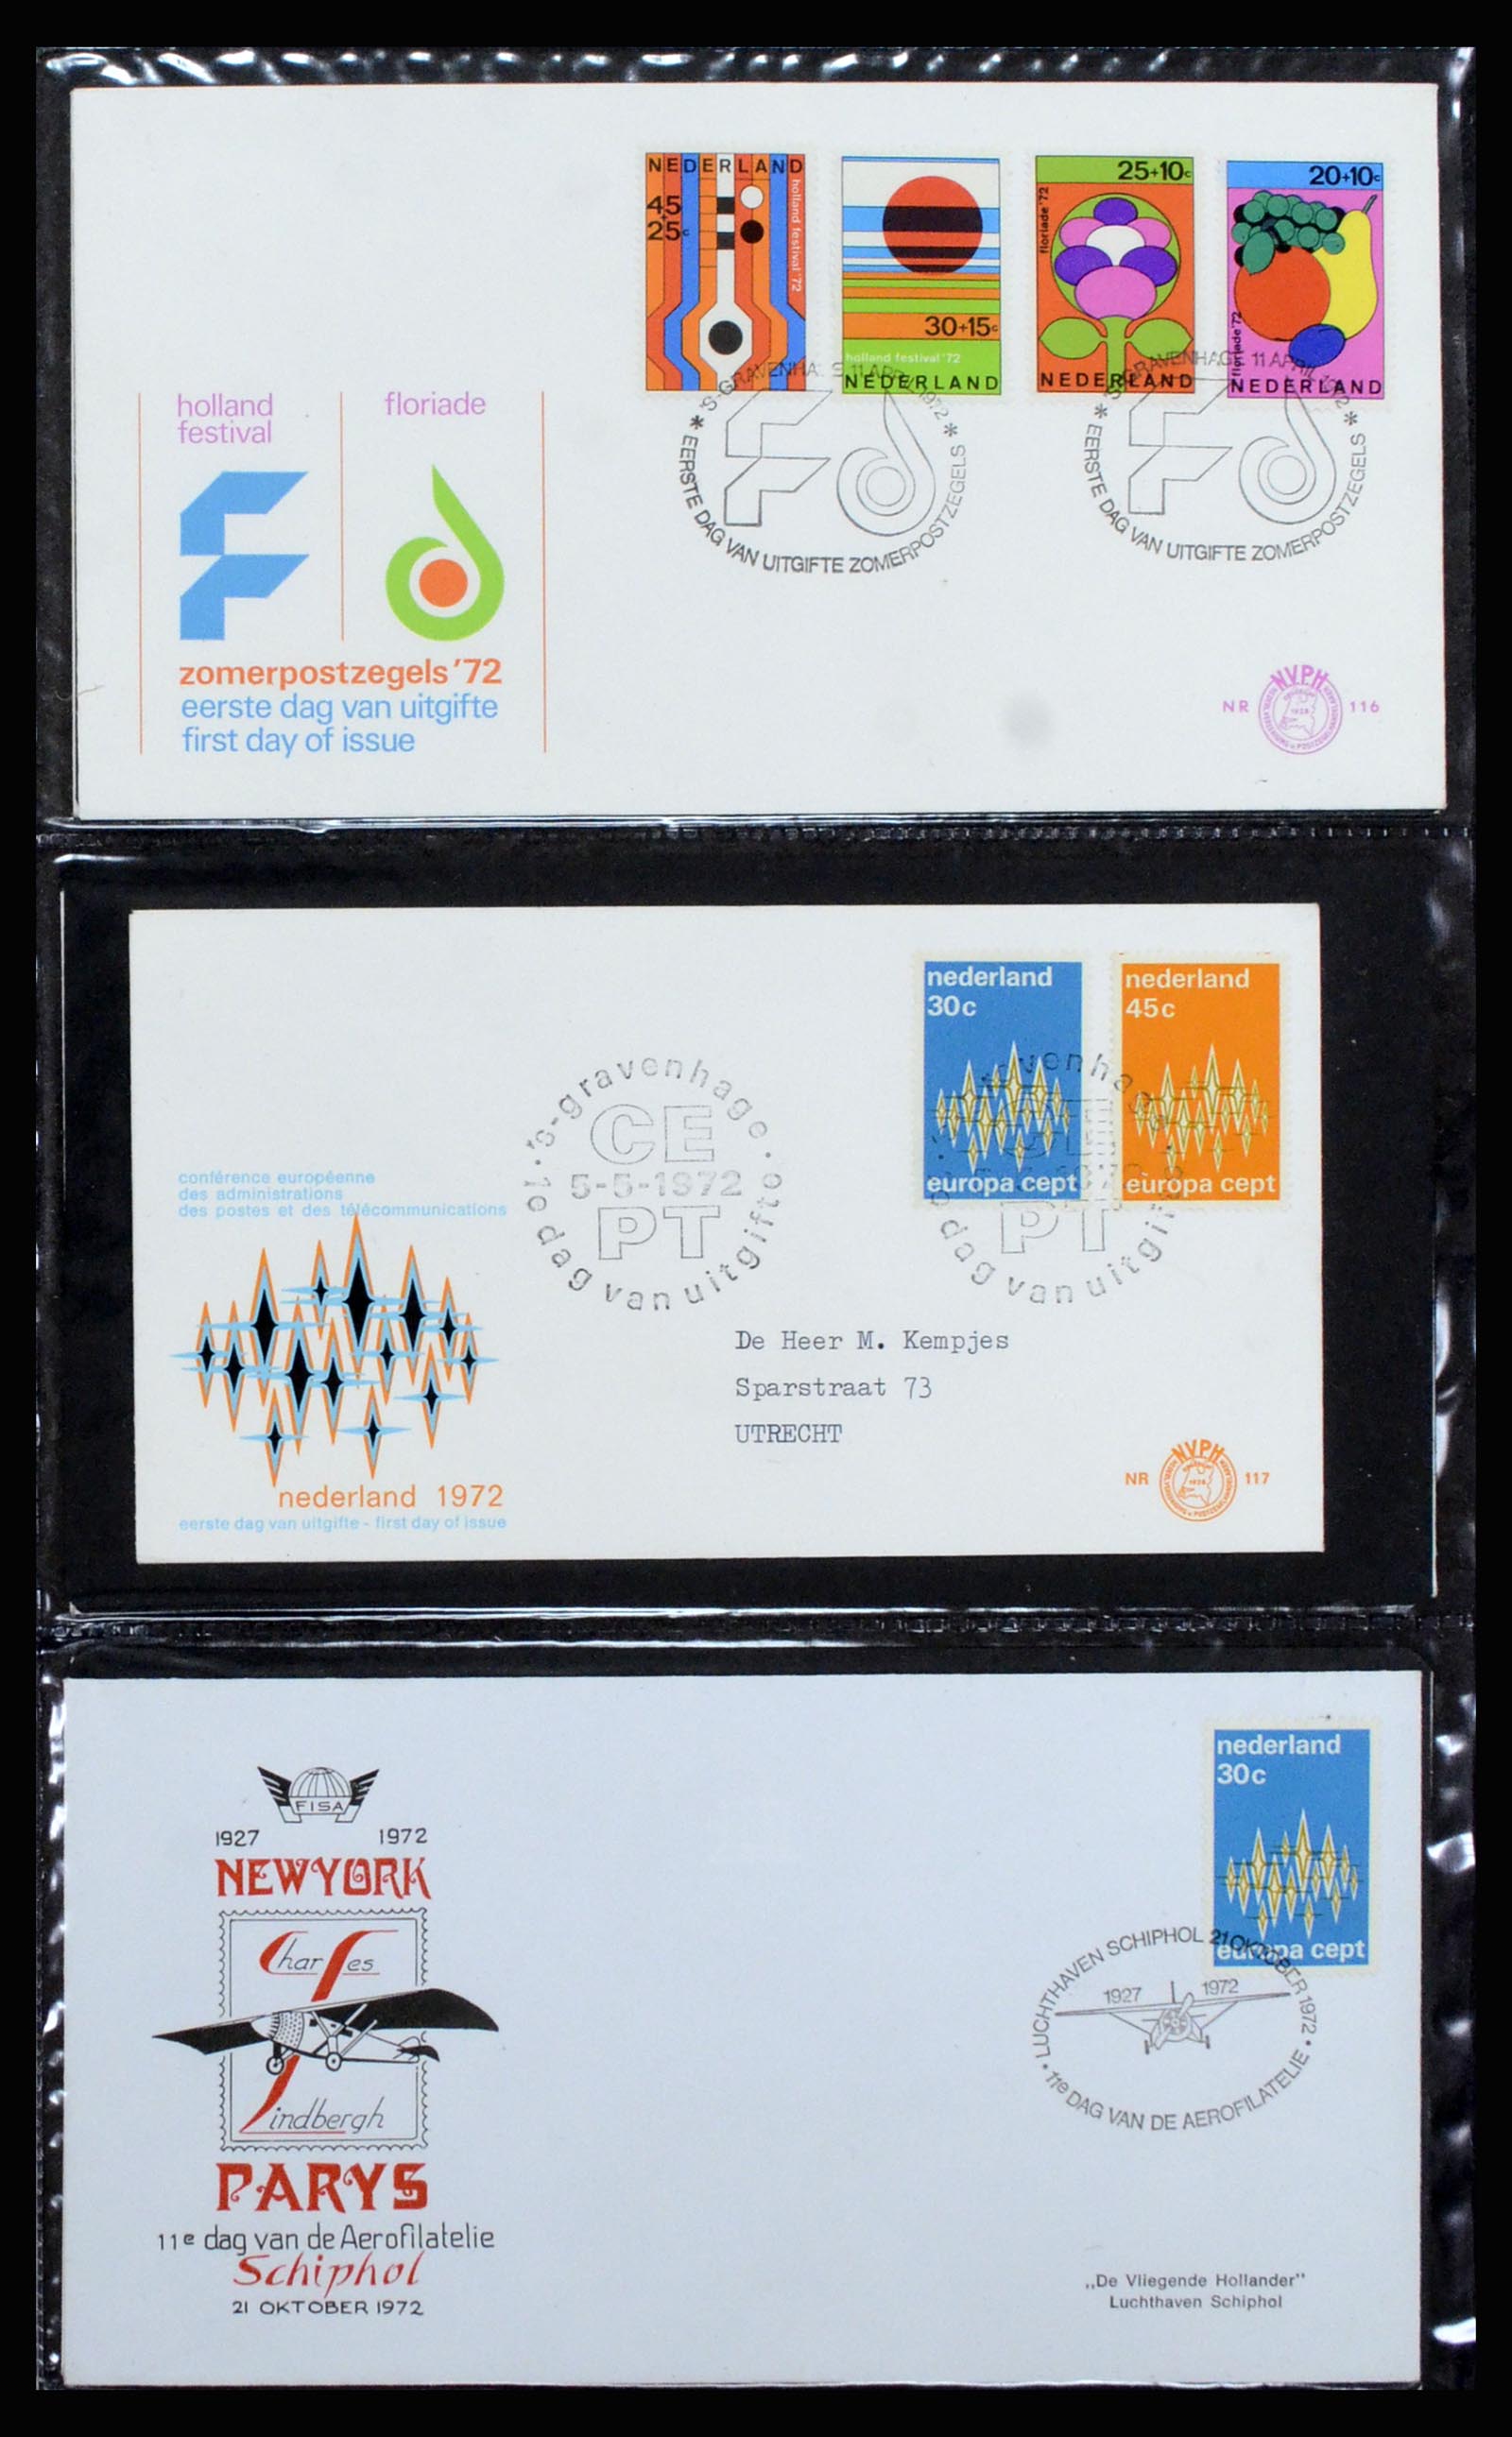 37197 041 - Stamp collection 37197 Netherlands FDC's 1950-2004.